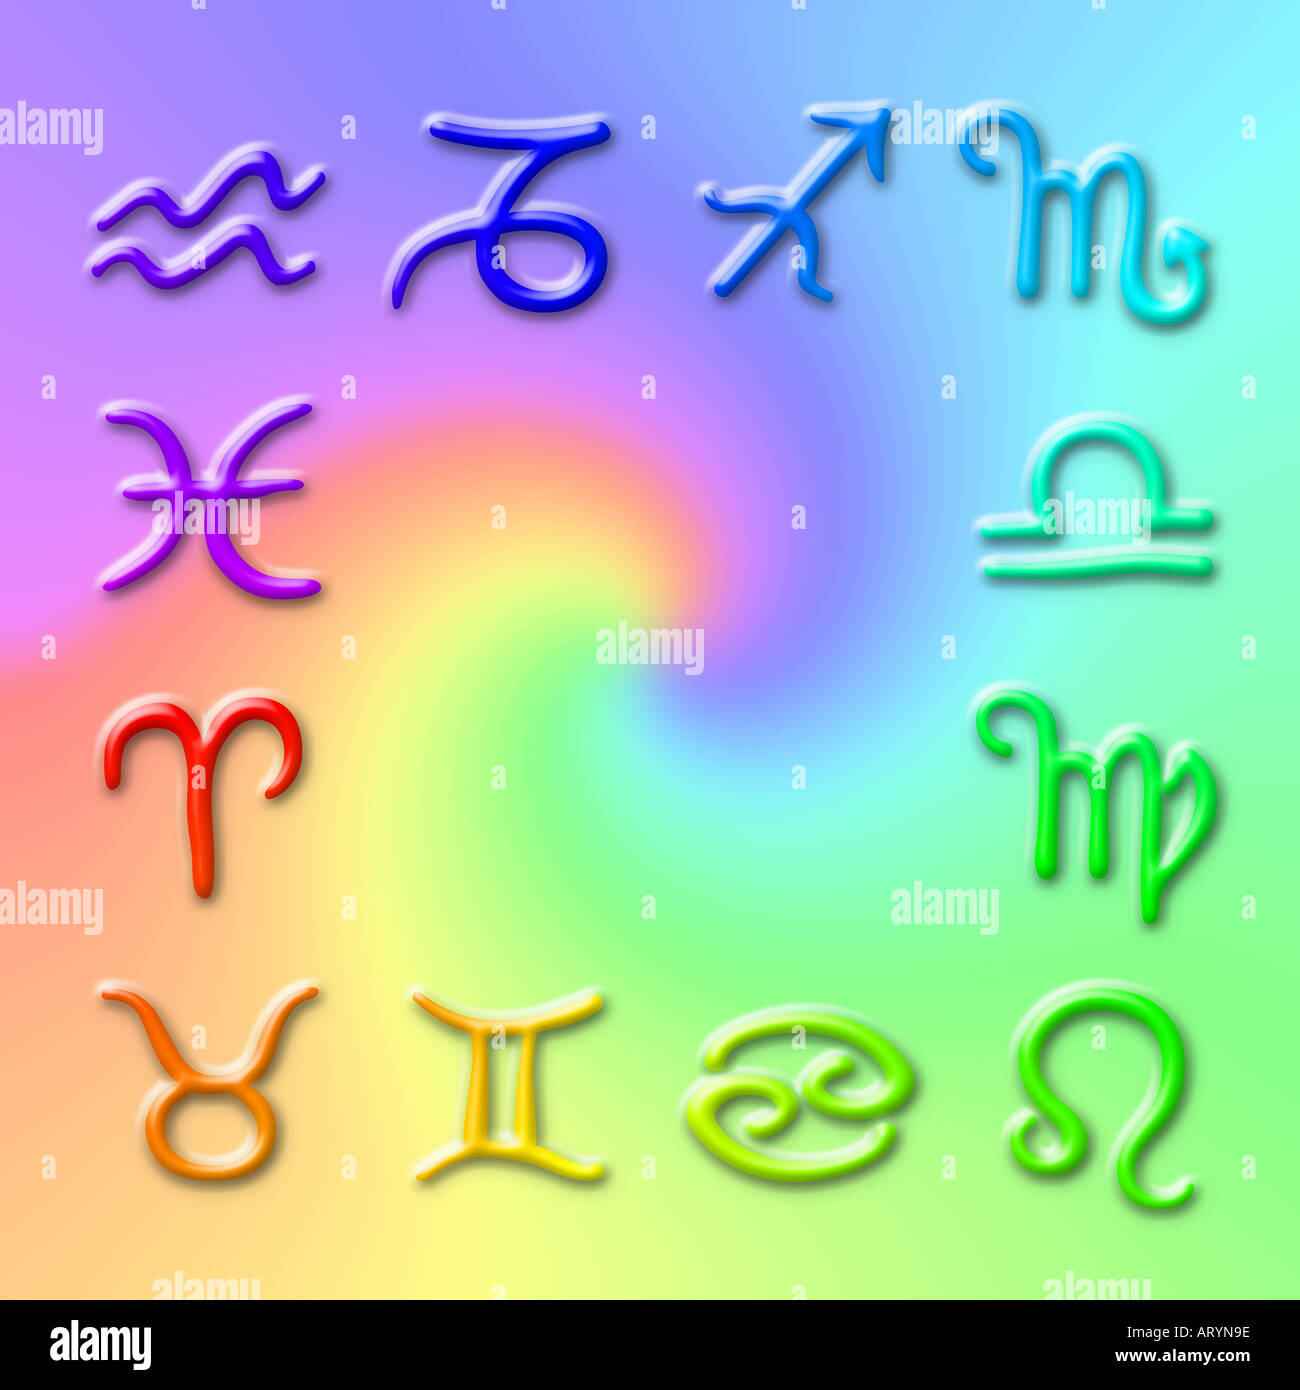 signs of the zodiac, computer-illustration Stock Photo